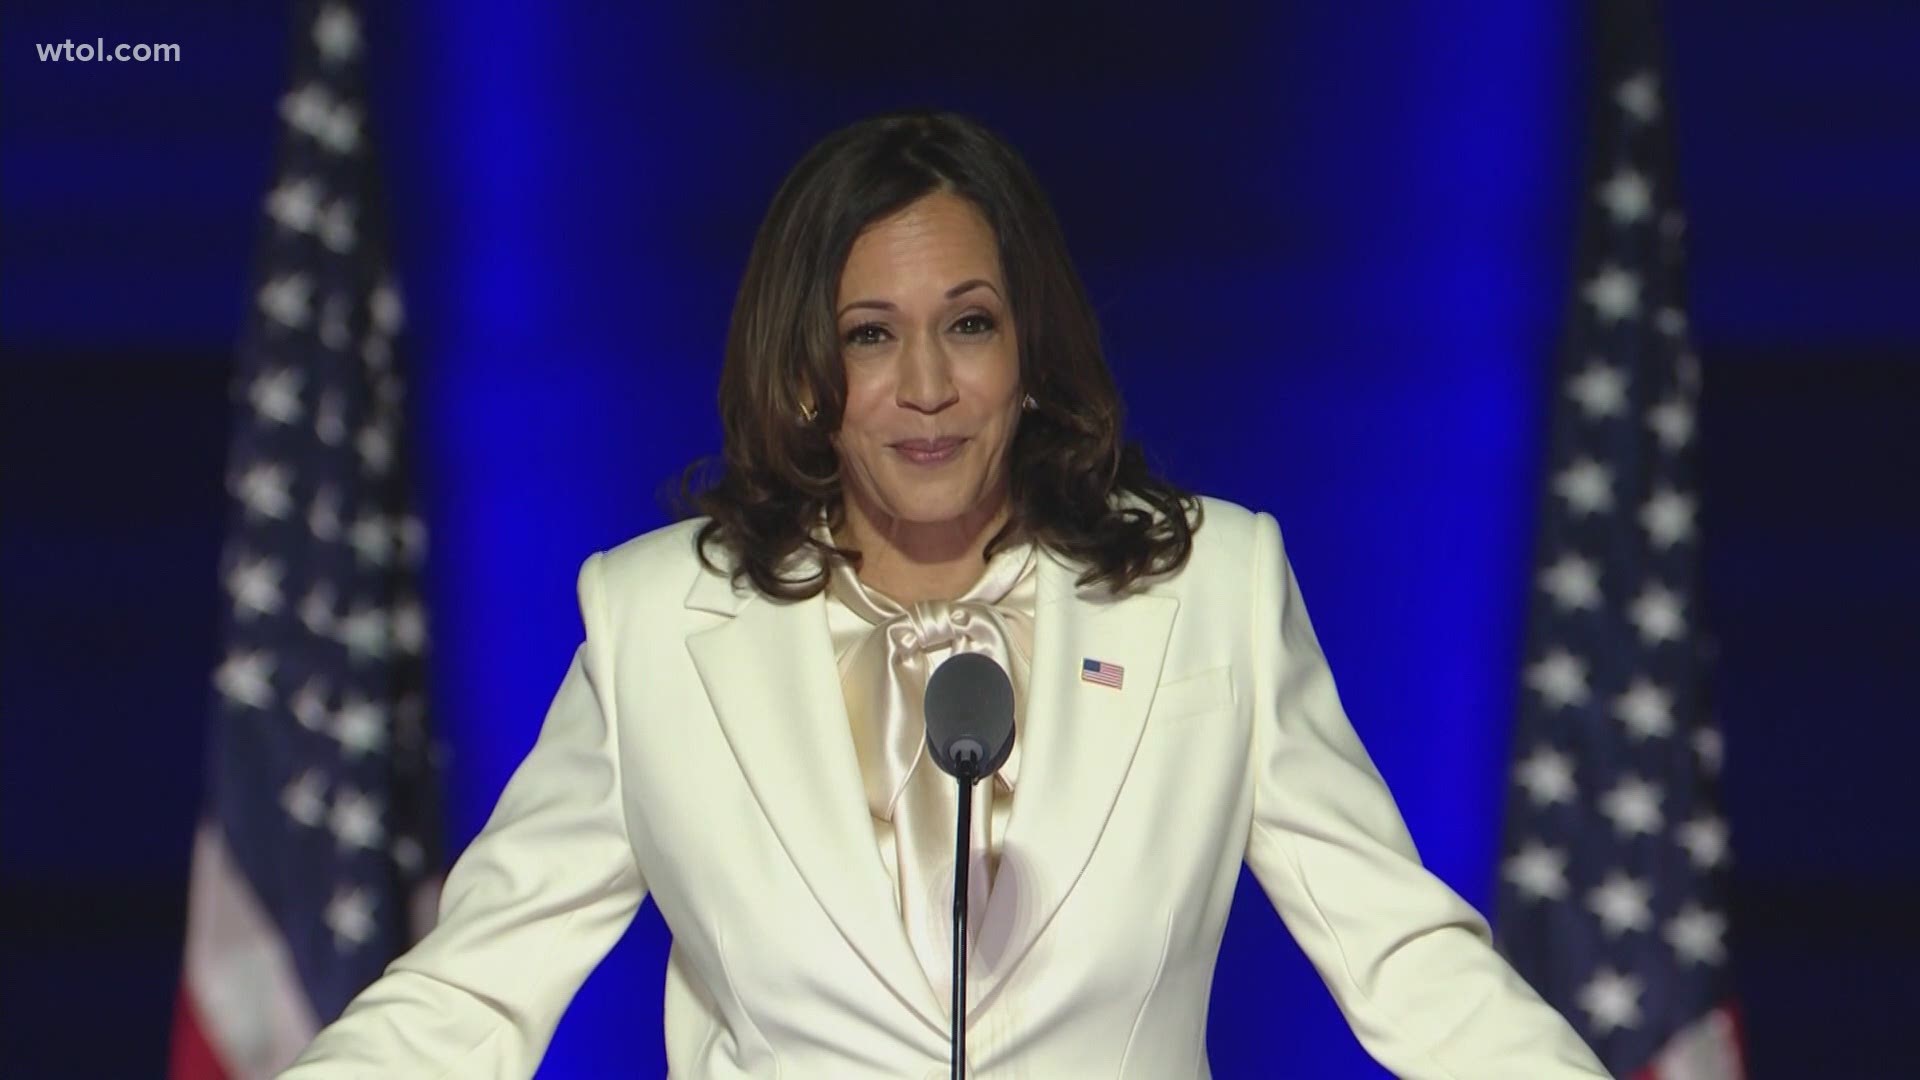 Kamala Harris will be the first woman and first Black woman to hold the office of Vice President of the United States.